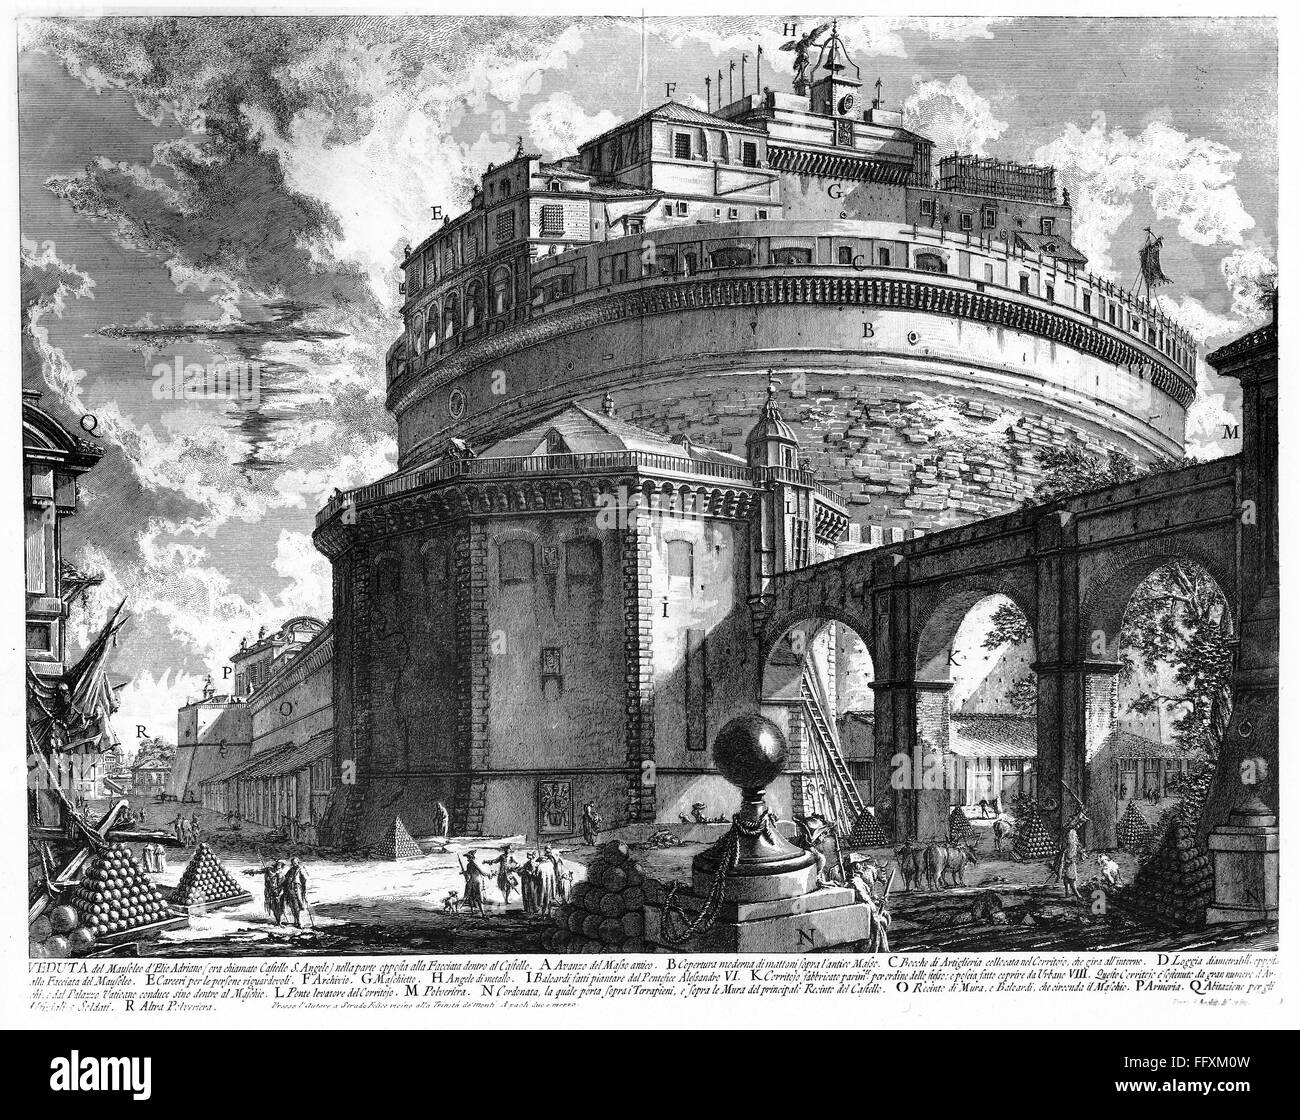 ROME: CASTEL SANT ANGELO. /nThe Castel Sant Angelo, or the Mausoleum of Hadrian. Etching by Giovanni Battista Piranesi from 'Vedute di Roma (Views of Rome),' c1756. Stock Photo